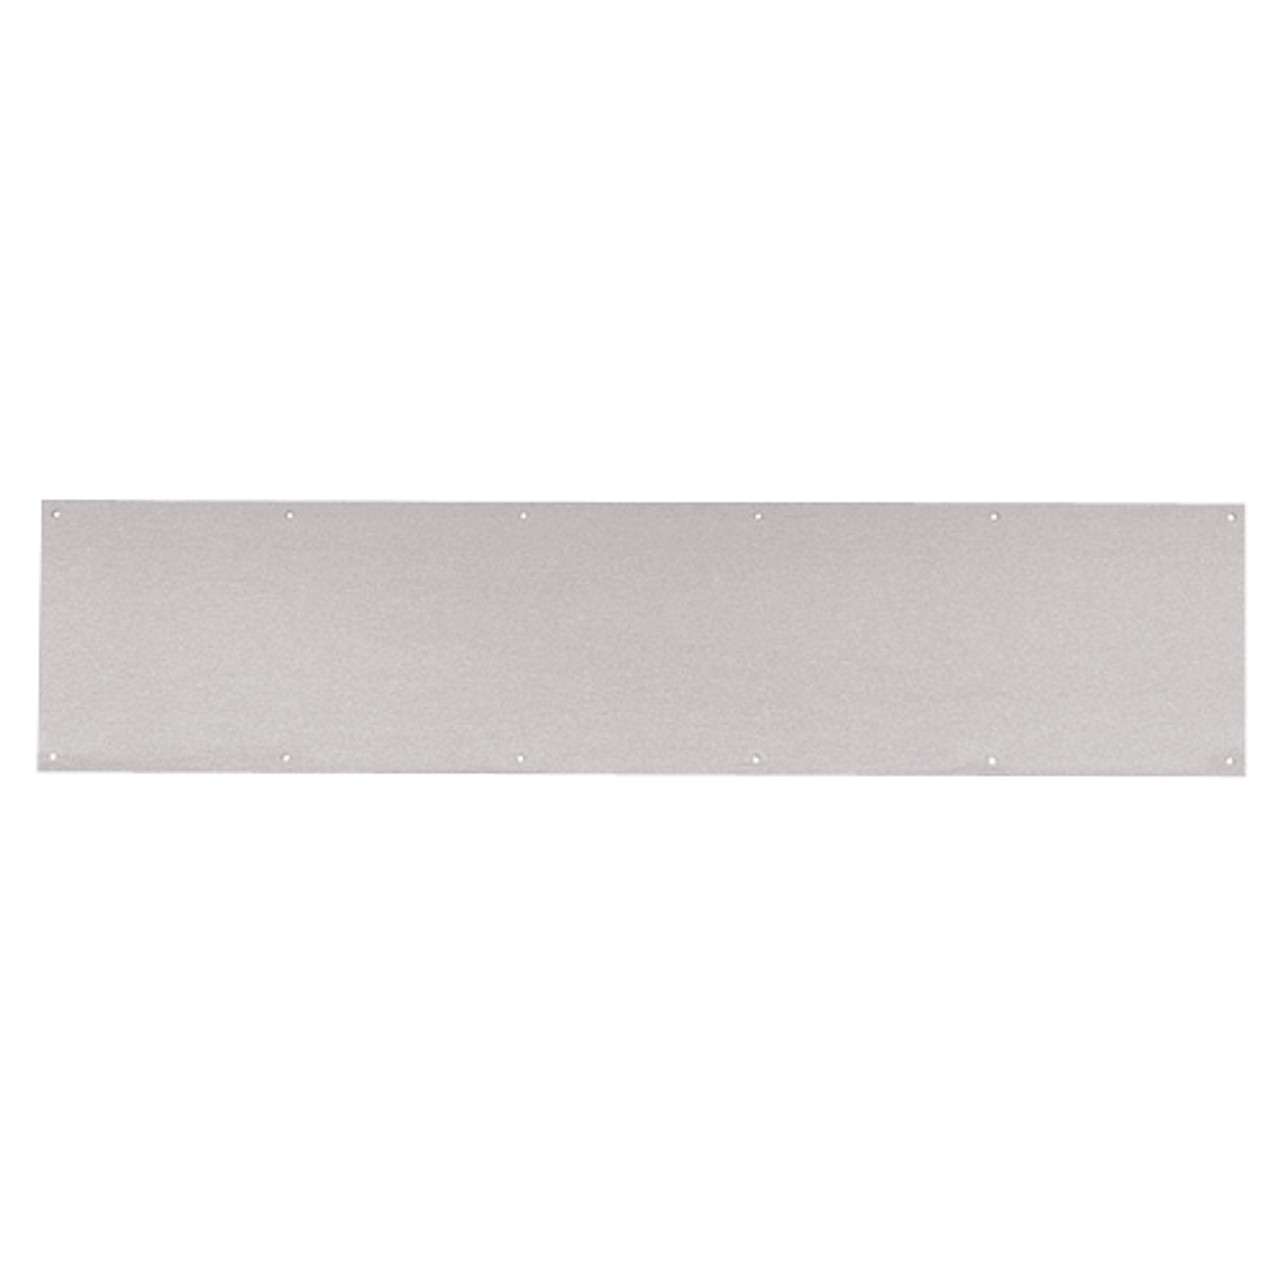 8400-US32D-30x21-B-CS Ives 8400 Series Protection Plate in Satin Stainless Steel